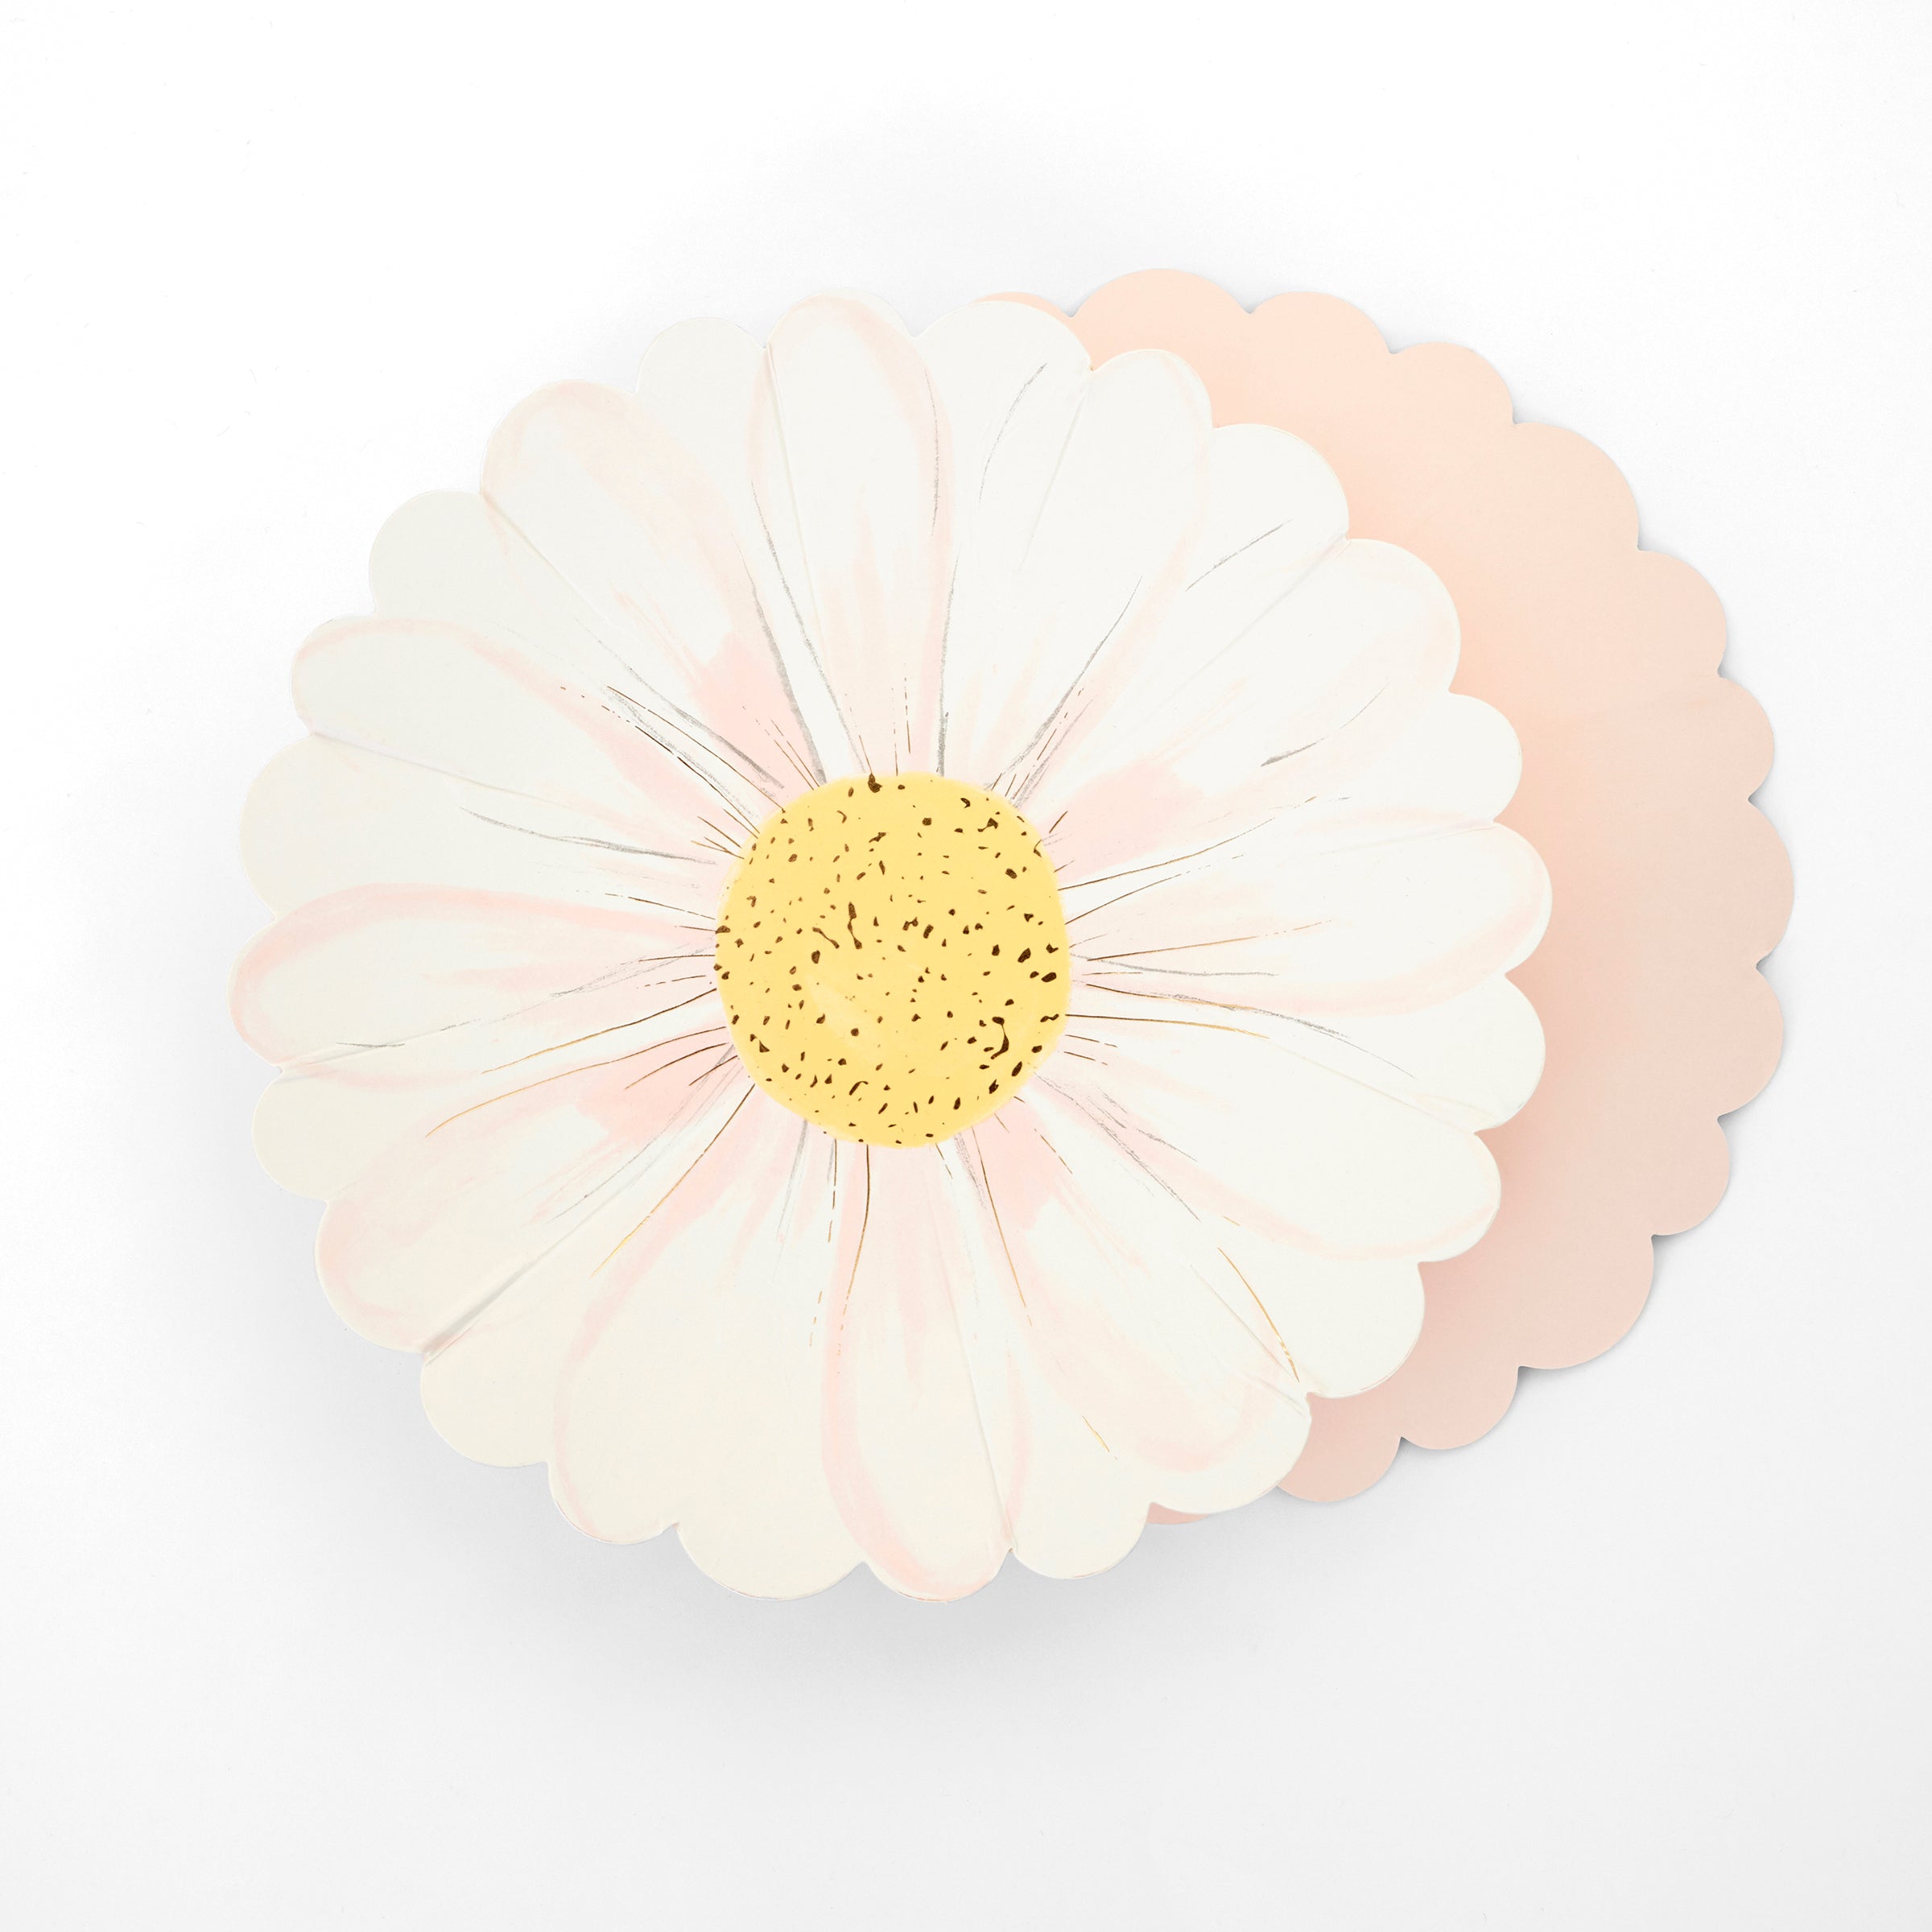 Our flower plates feature a beautifully illustrated daisy with shiny gold foil details.